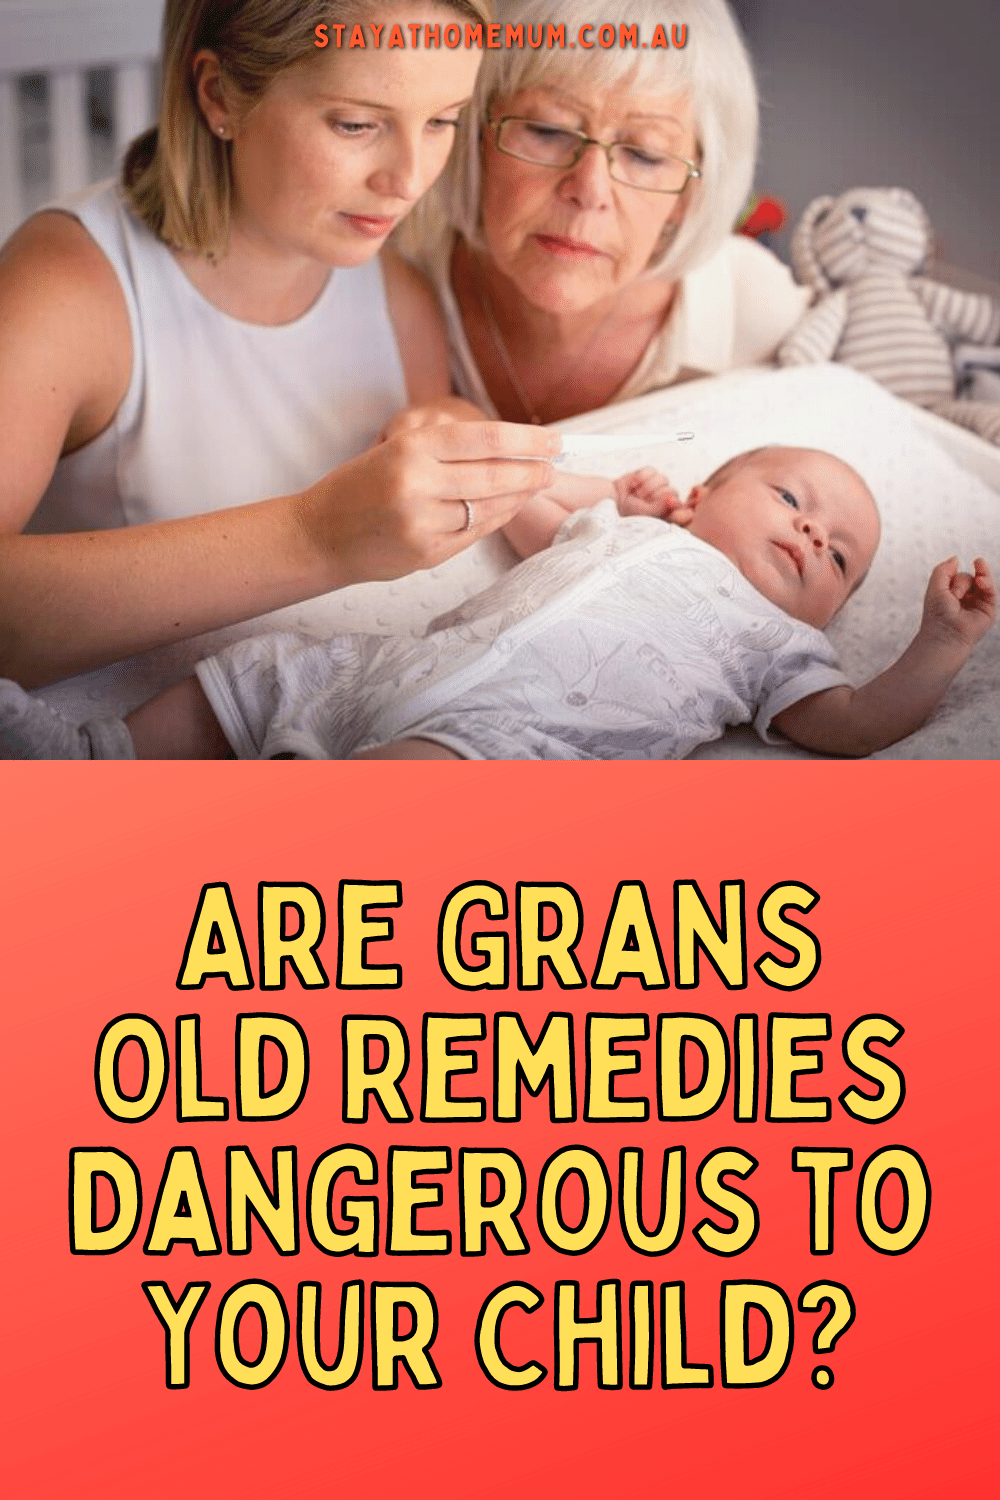 Are Grans Old Remedies Dangerous to Your Child? | Stay At Home Mum